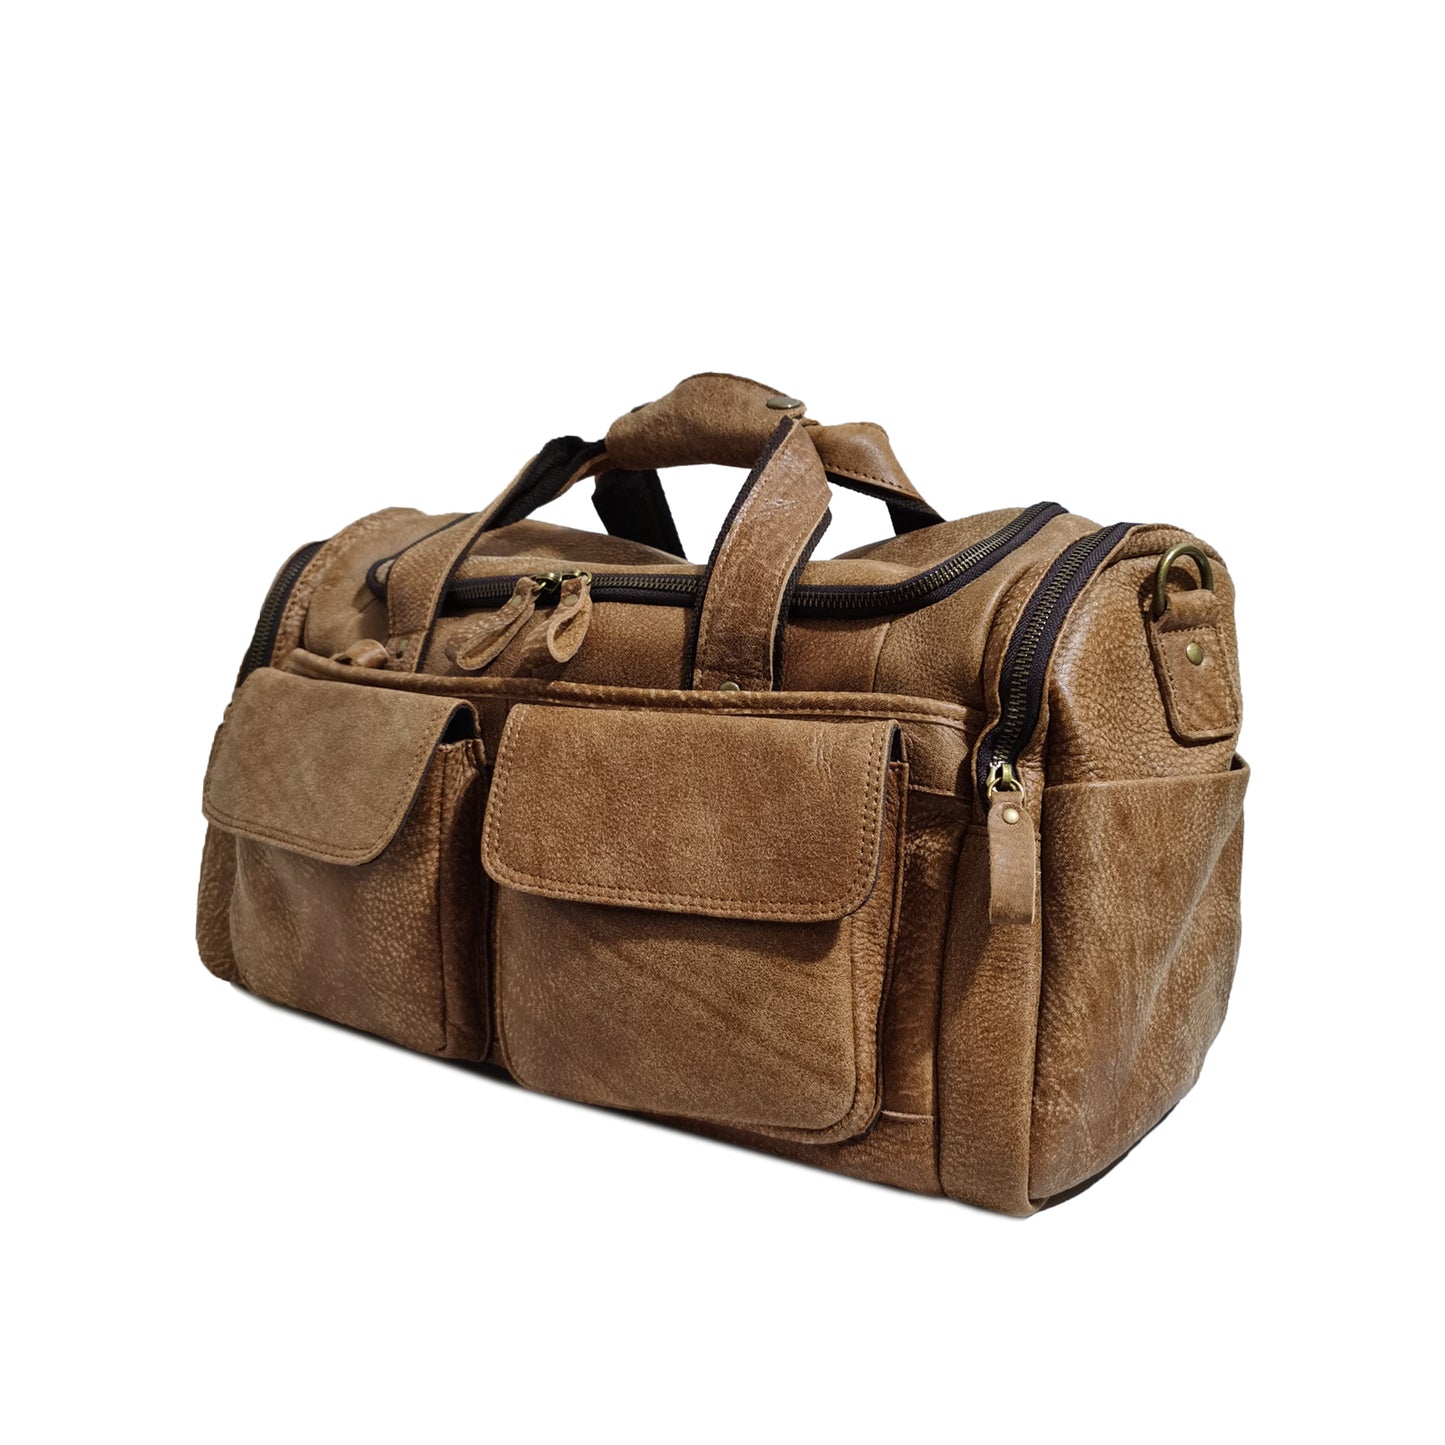 Unisex Women's and Men's genuine cowhide leather duffel travel bag Poches duffel design